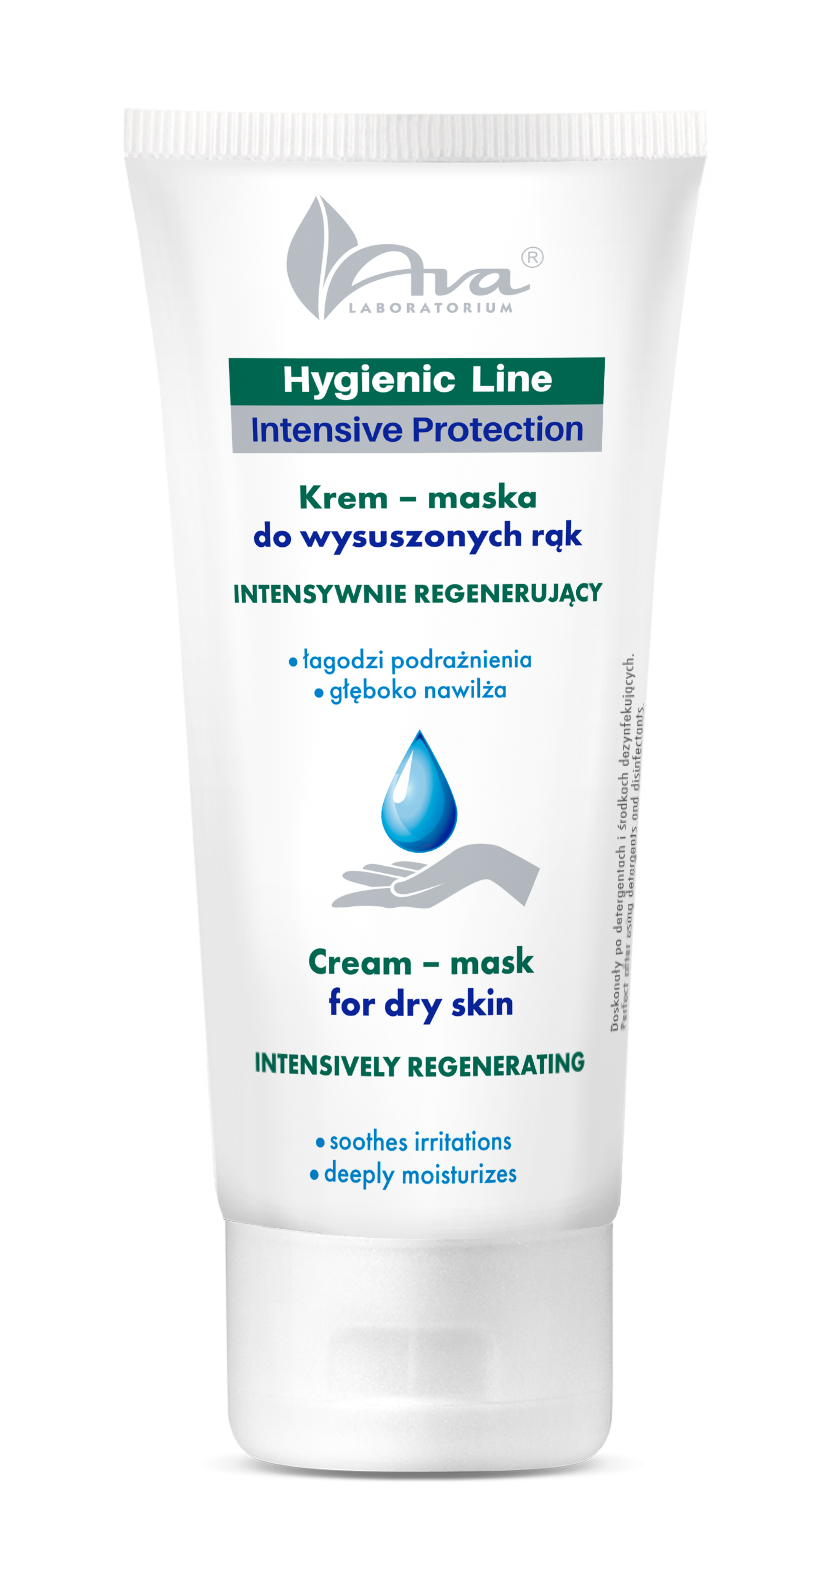 Hygenic Line – Cream-mask for dry hands